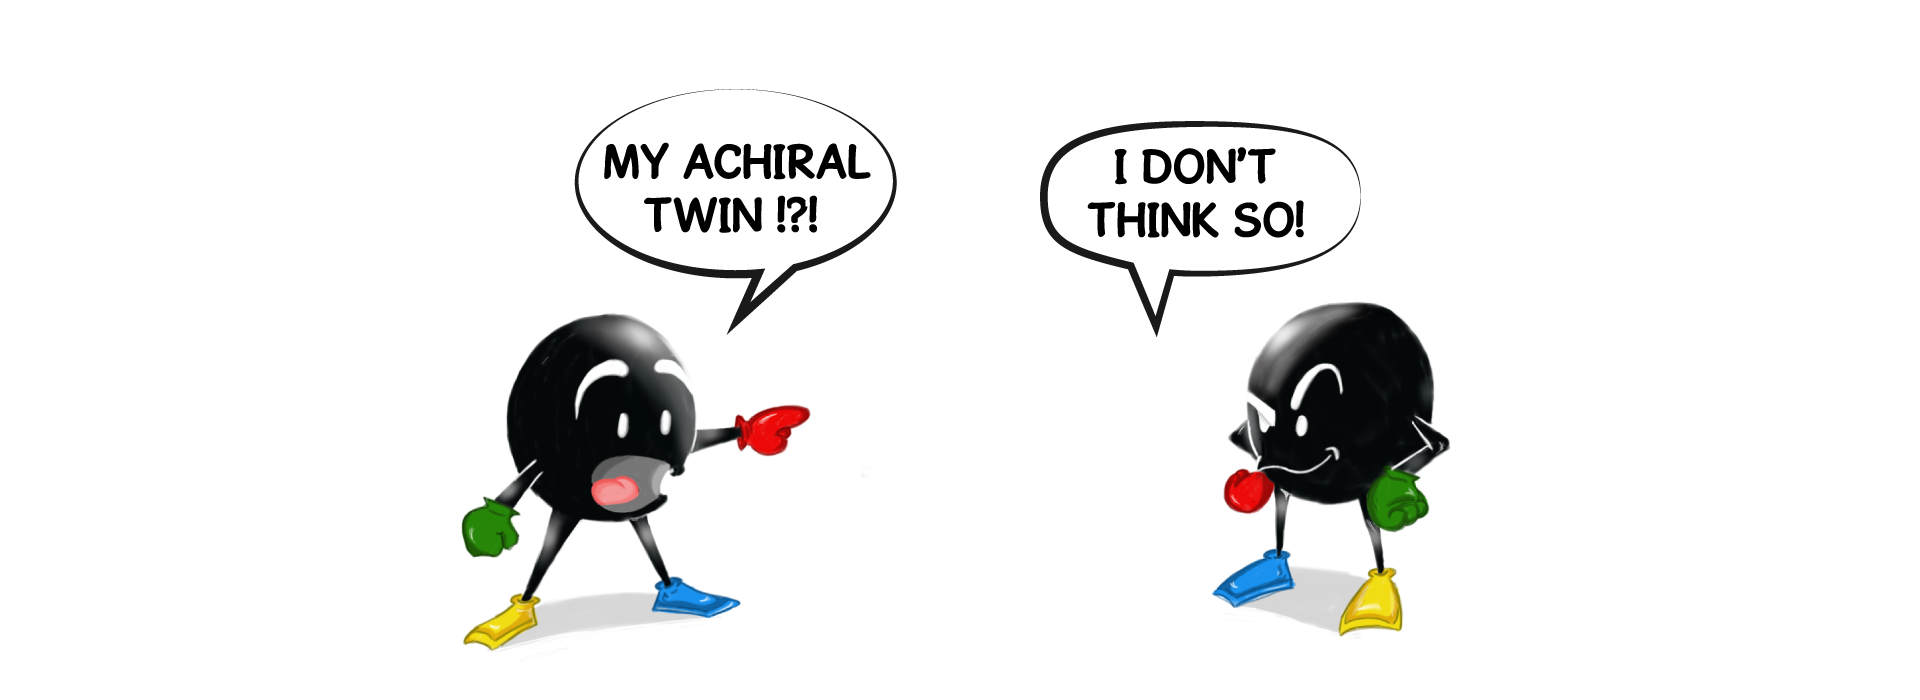 Graphic of two carbons facing each other. One says: My achiral twin! The other states: I don't think so.